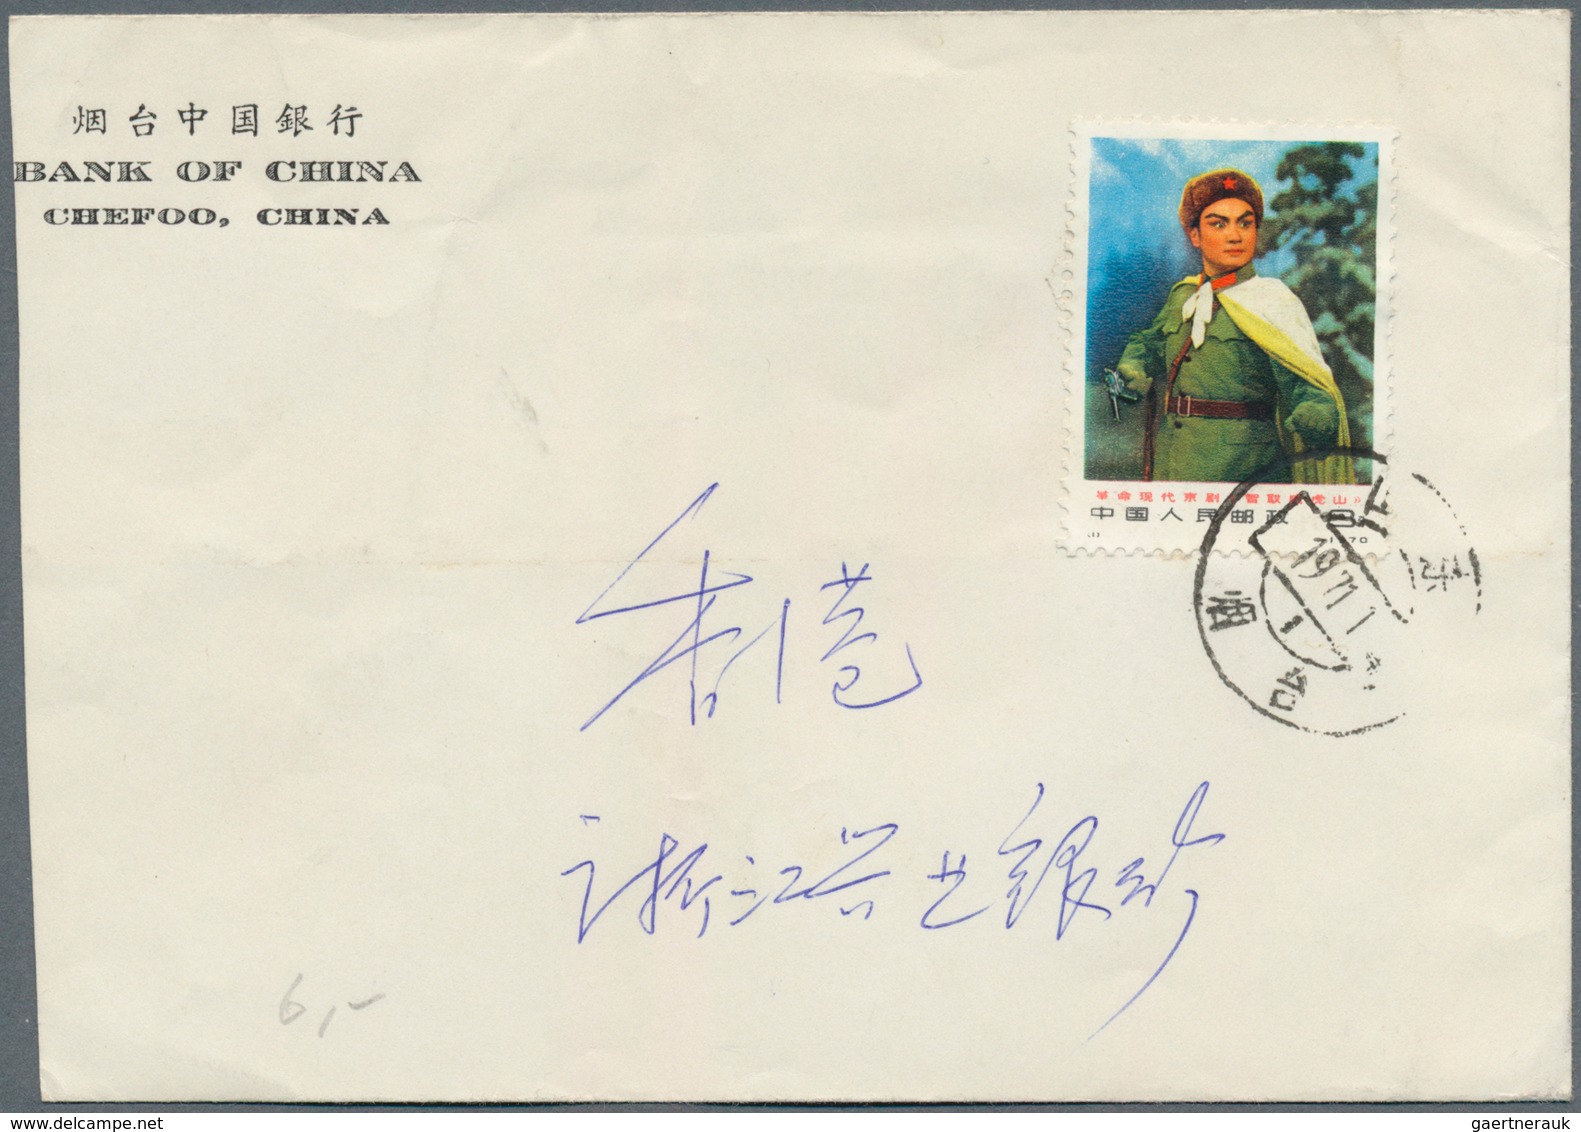 22455 China - Volksrepublik: 1970/71, Peking opera N1/6 on covers (7, single franks and one registered to